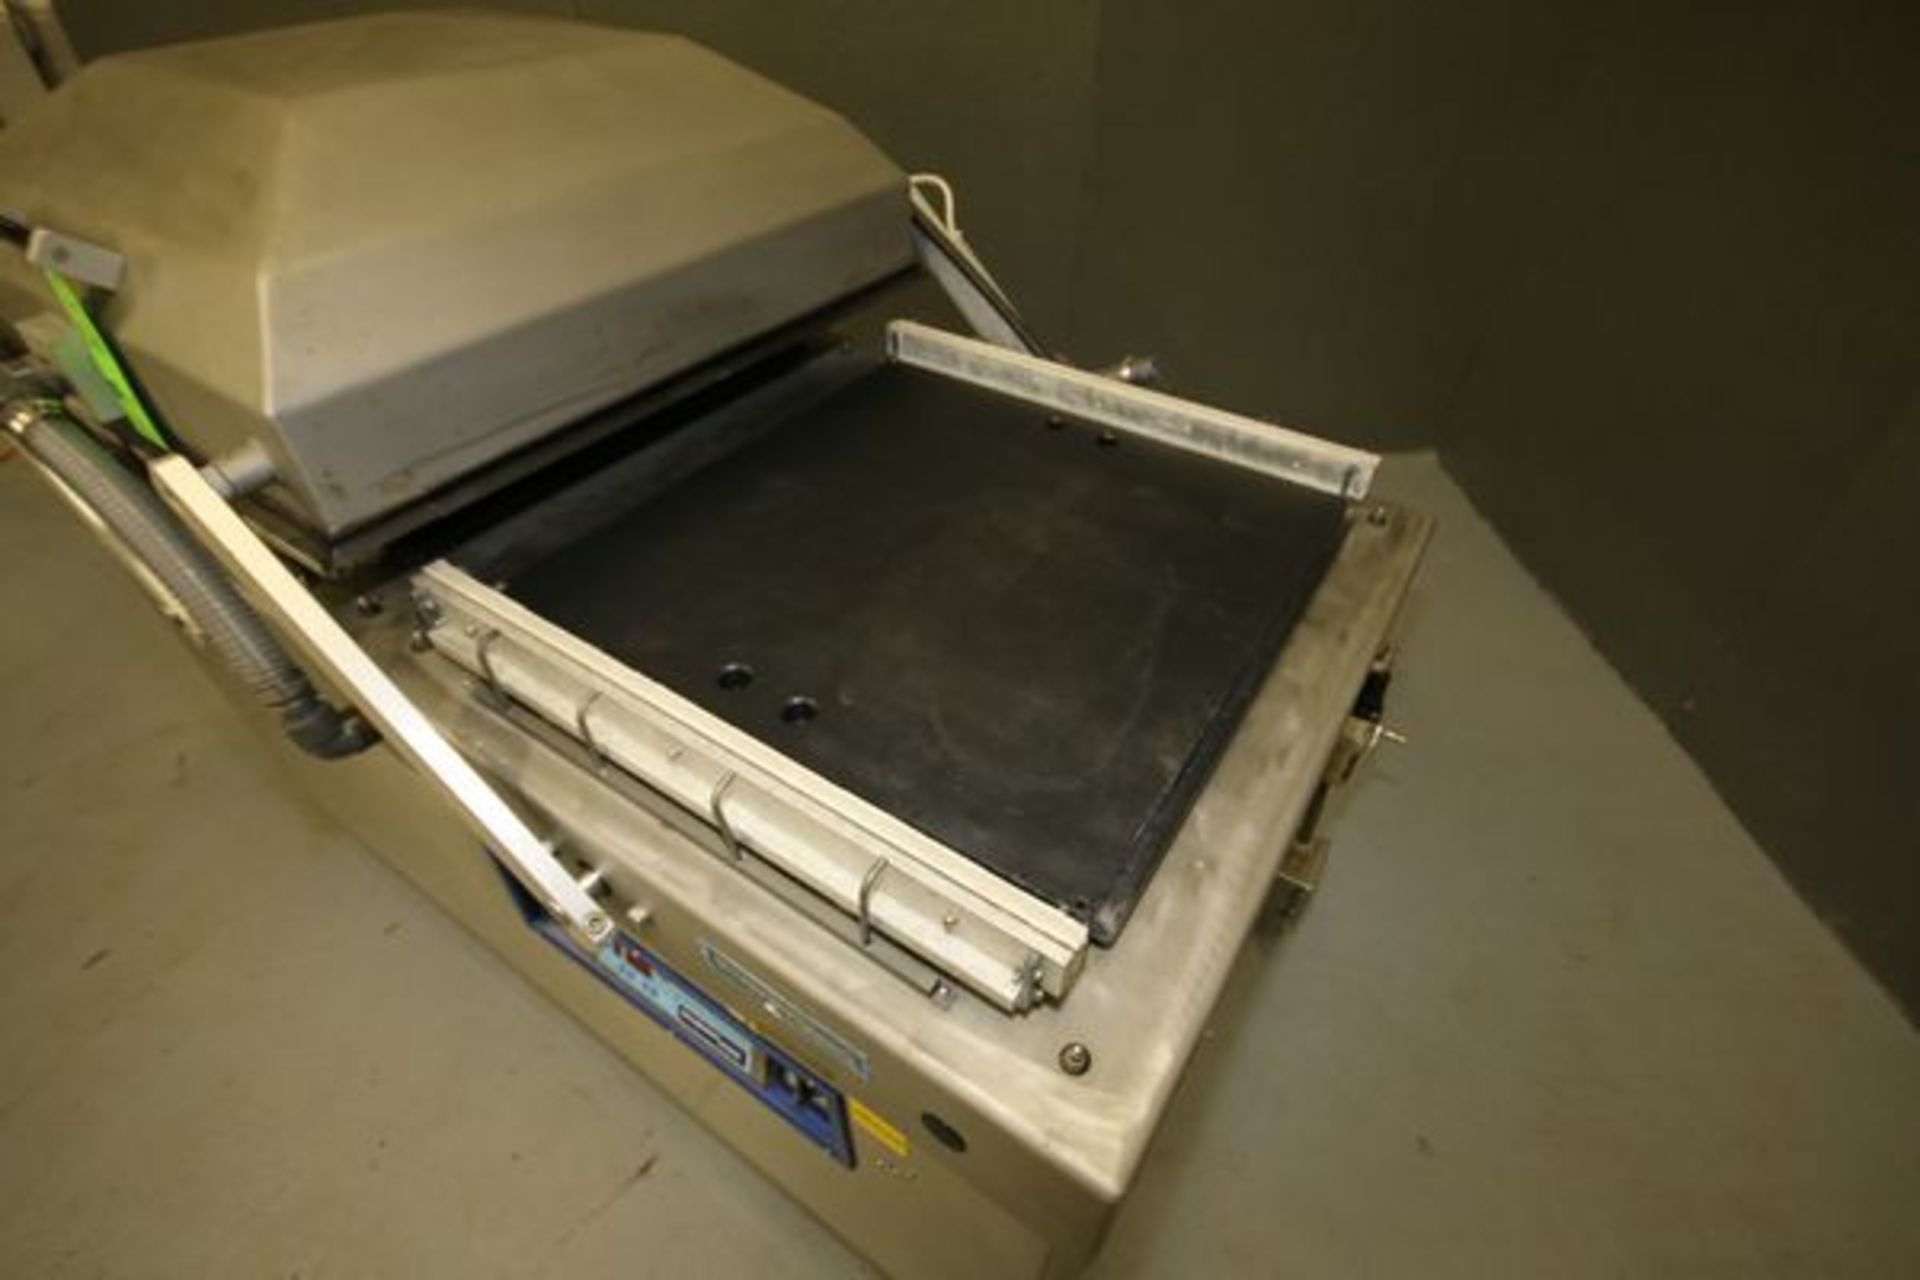 Smith SuperVac Dual Vacuum Sealer, Type GK290 with Seal Platform Dimension: Aprox. 24" x 24", 460 - Image 2 of 8